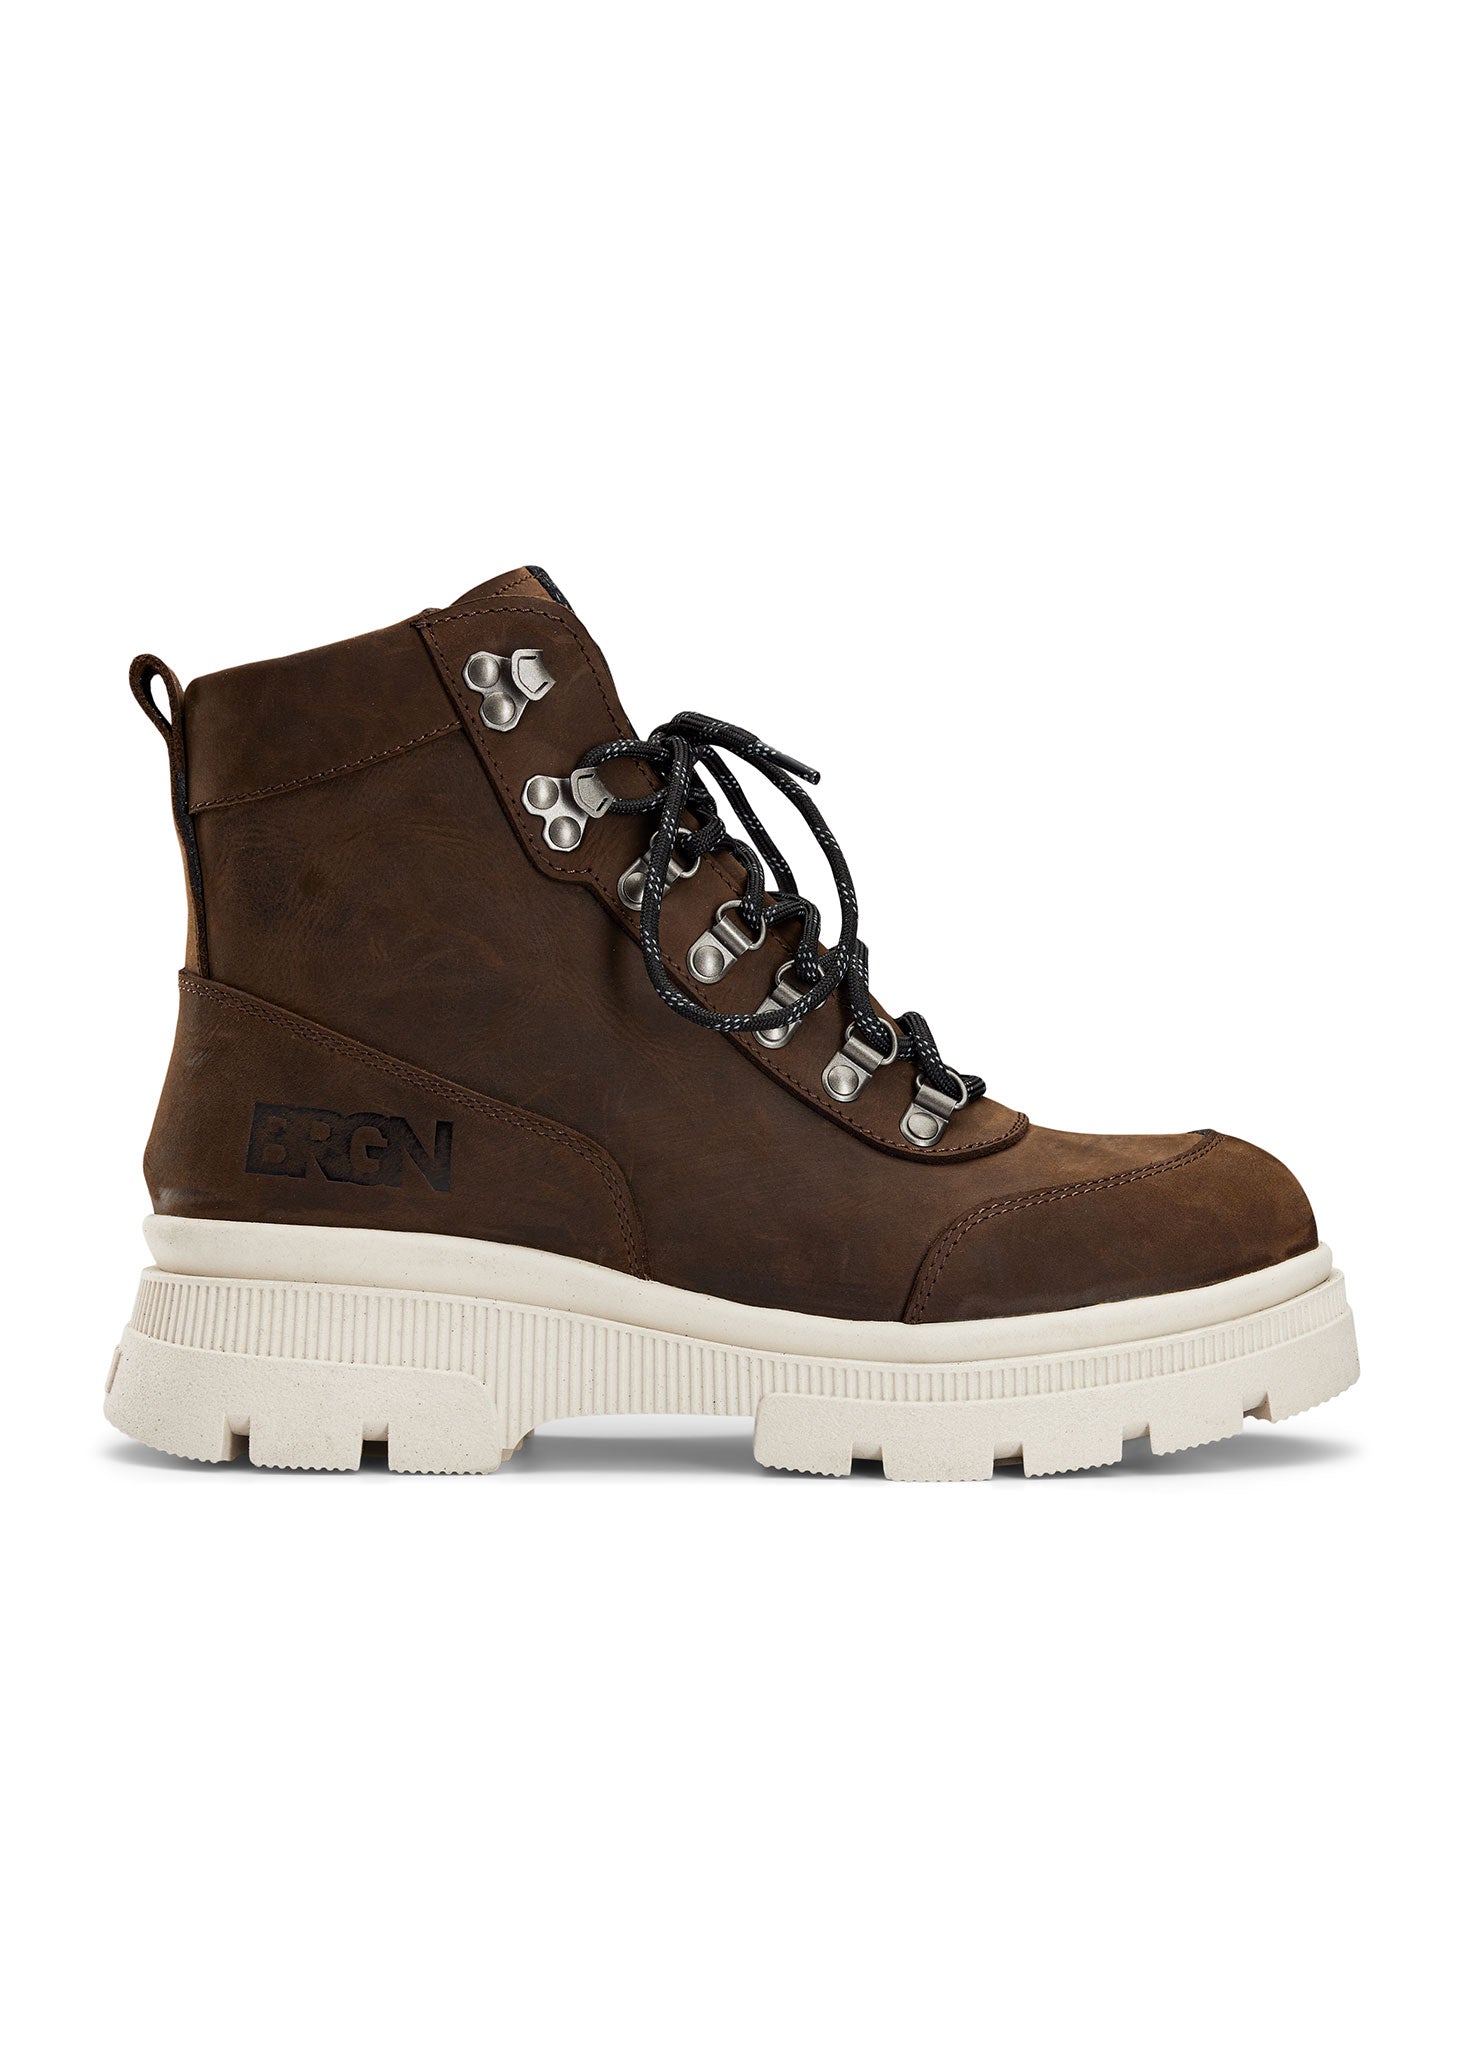 BRGN Hiking Boots Shoes 187 Chocolate Brown / 135 Sand